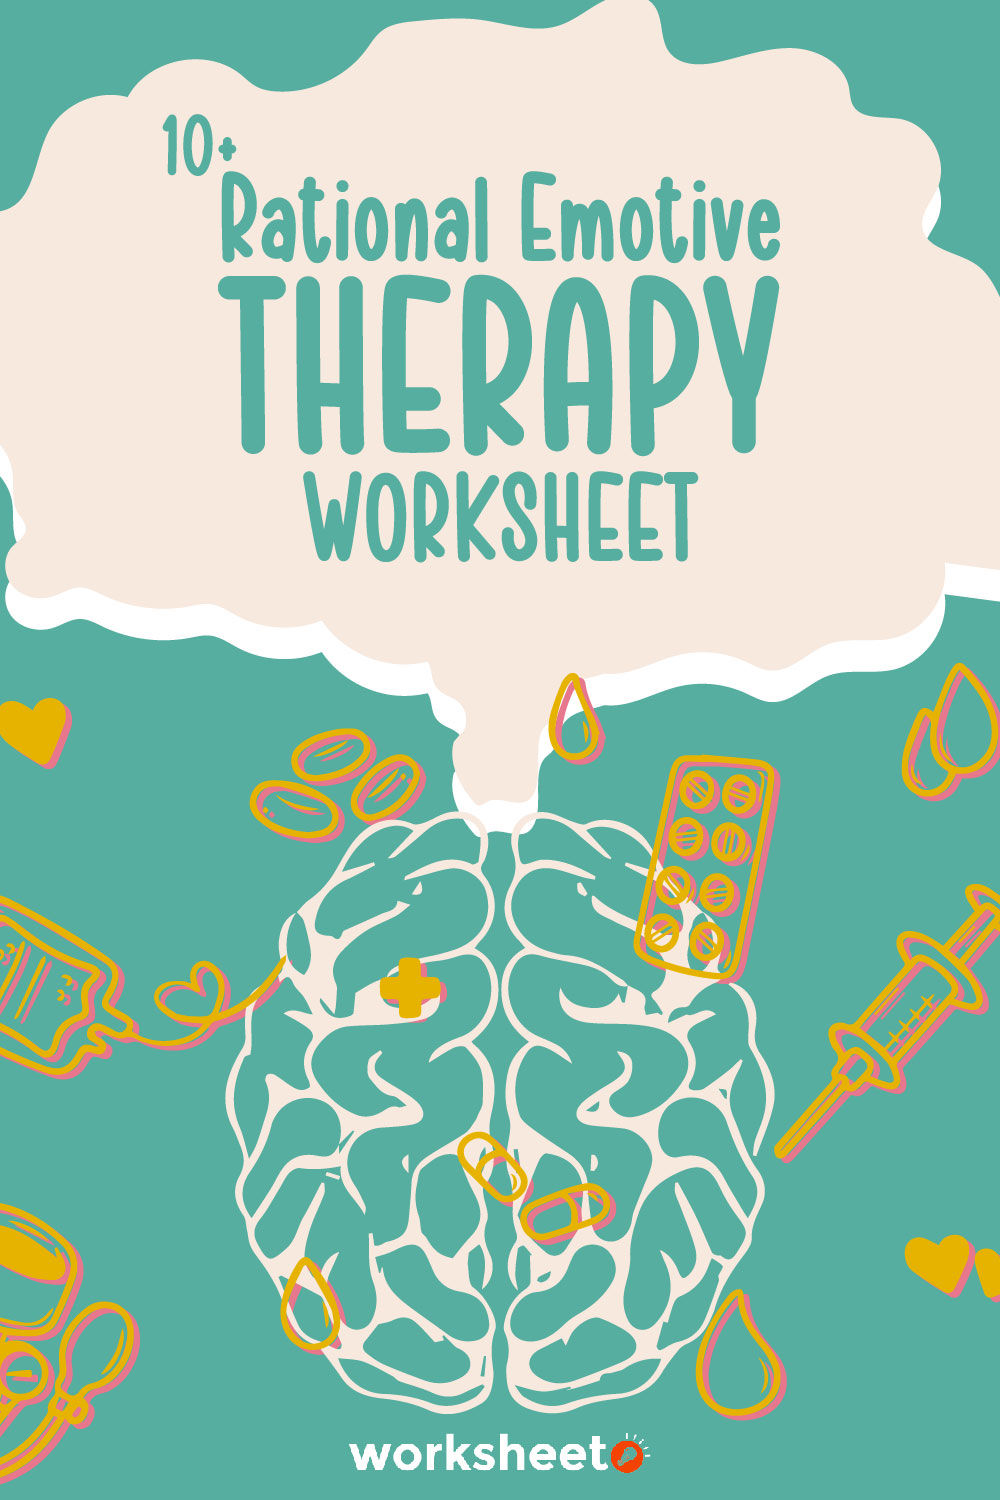 14 Images of Rational Emotive Therapy Worksheet